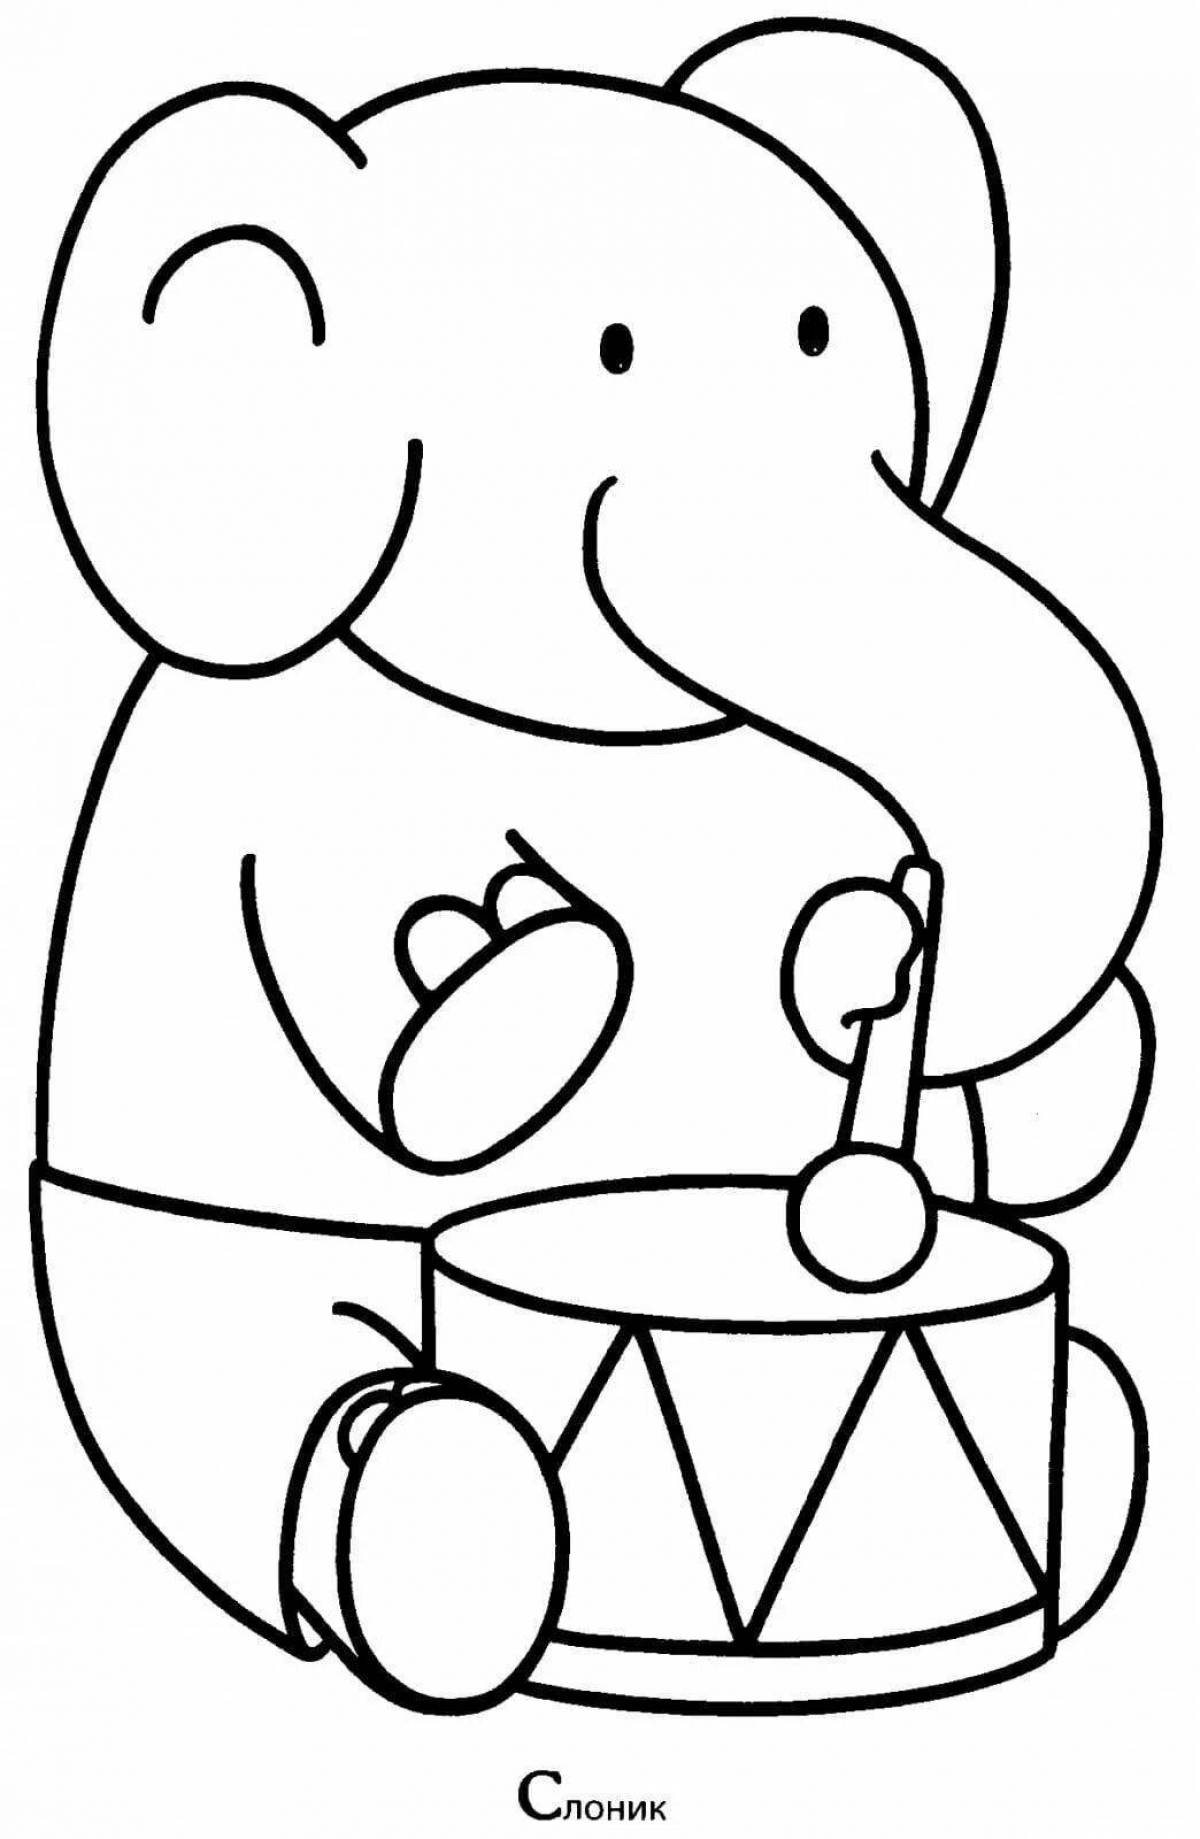 A fun collection of coloring pages for kids